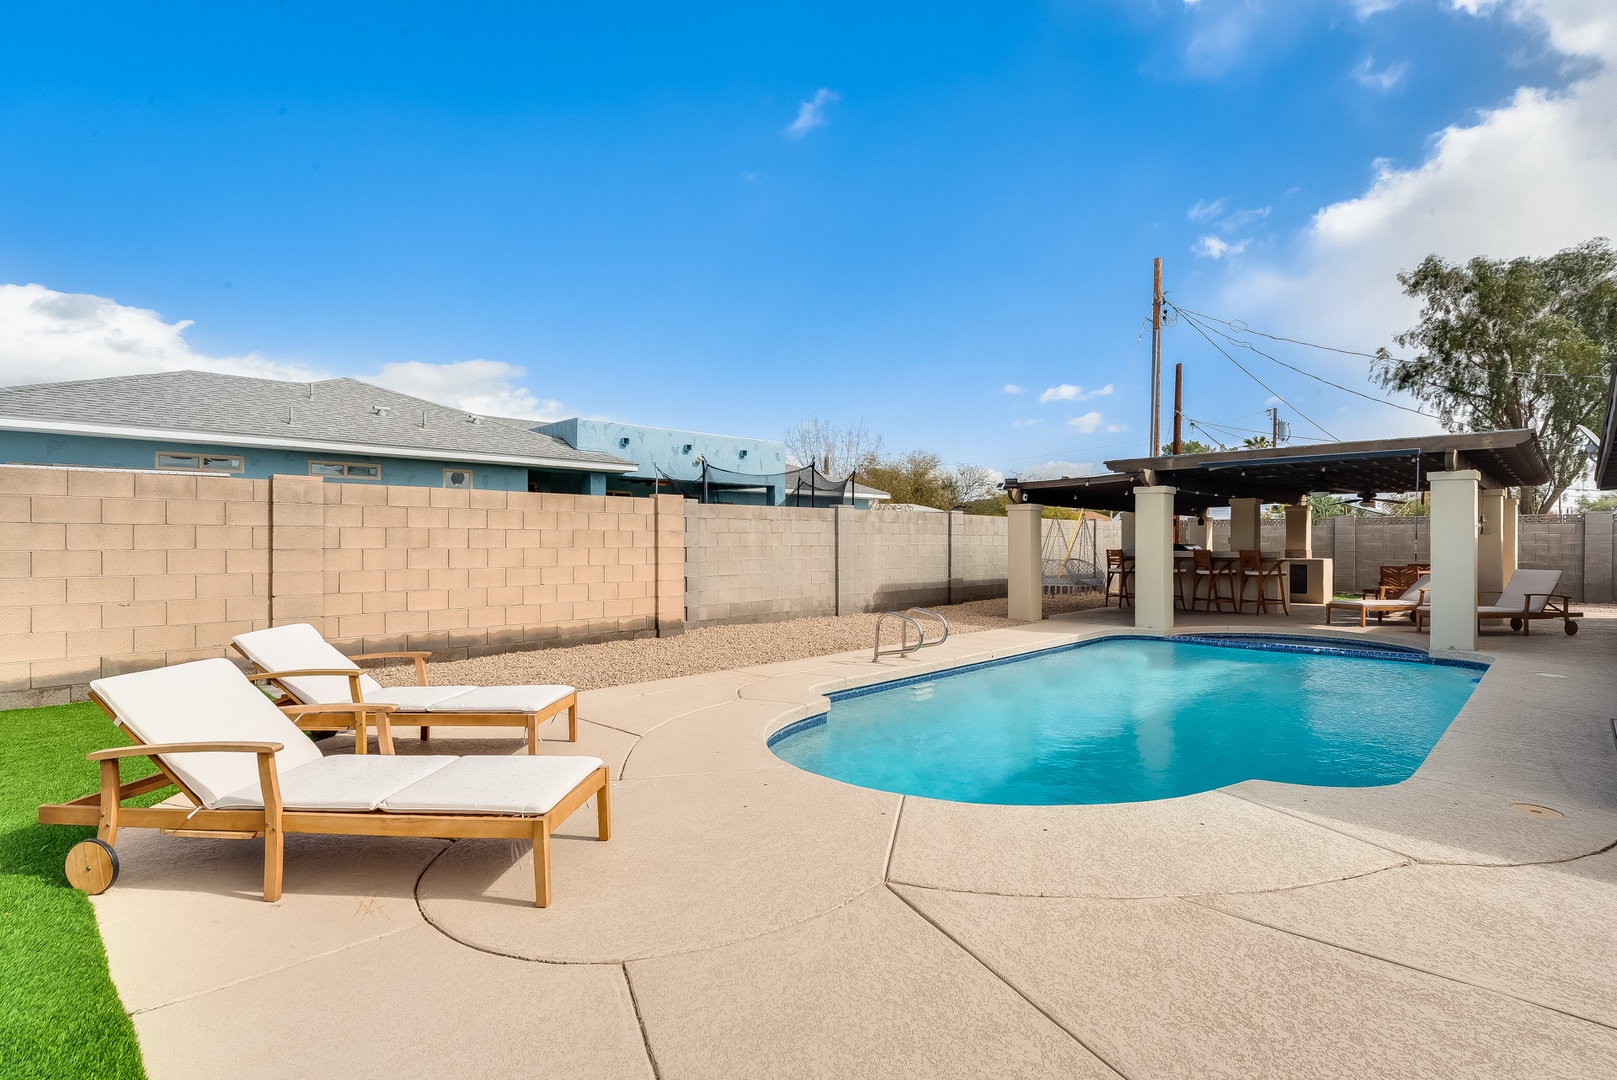 Phoenix Vacation Rentals, Desert Oasis - Private pool to cool off on warmer days